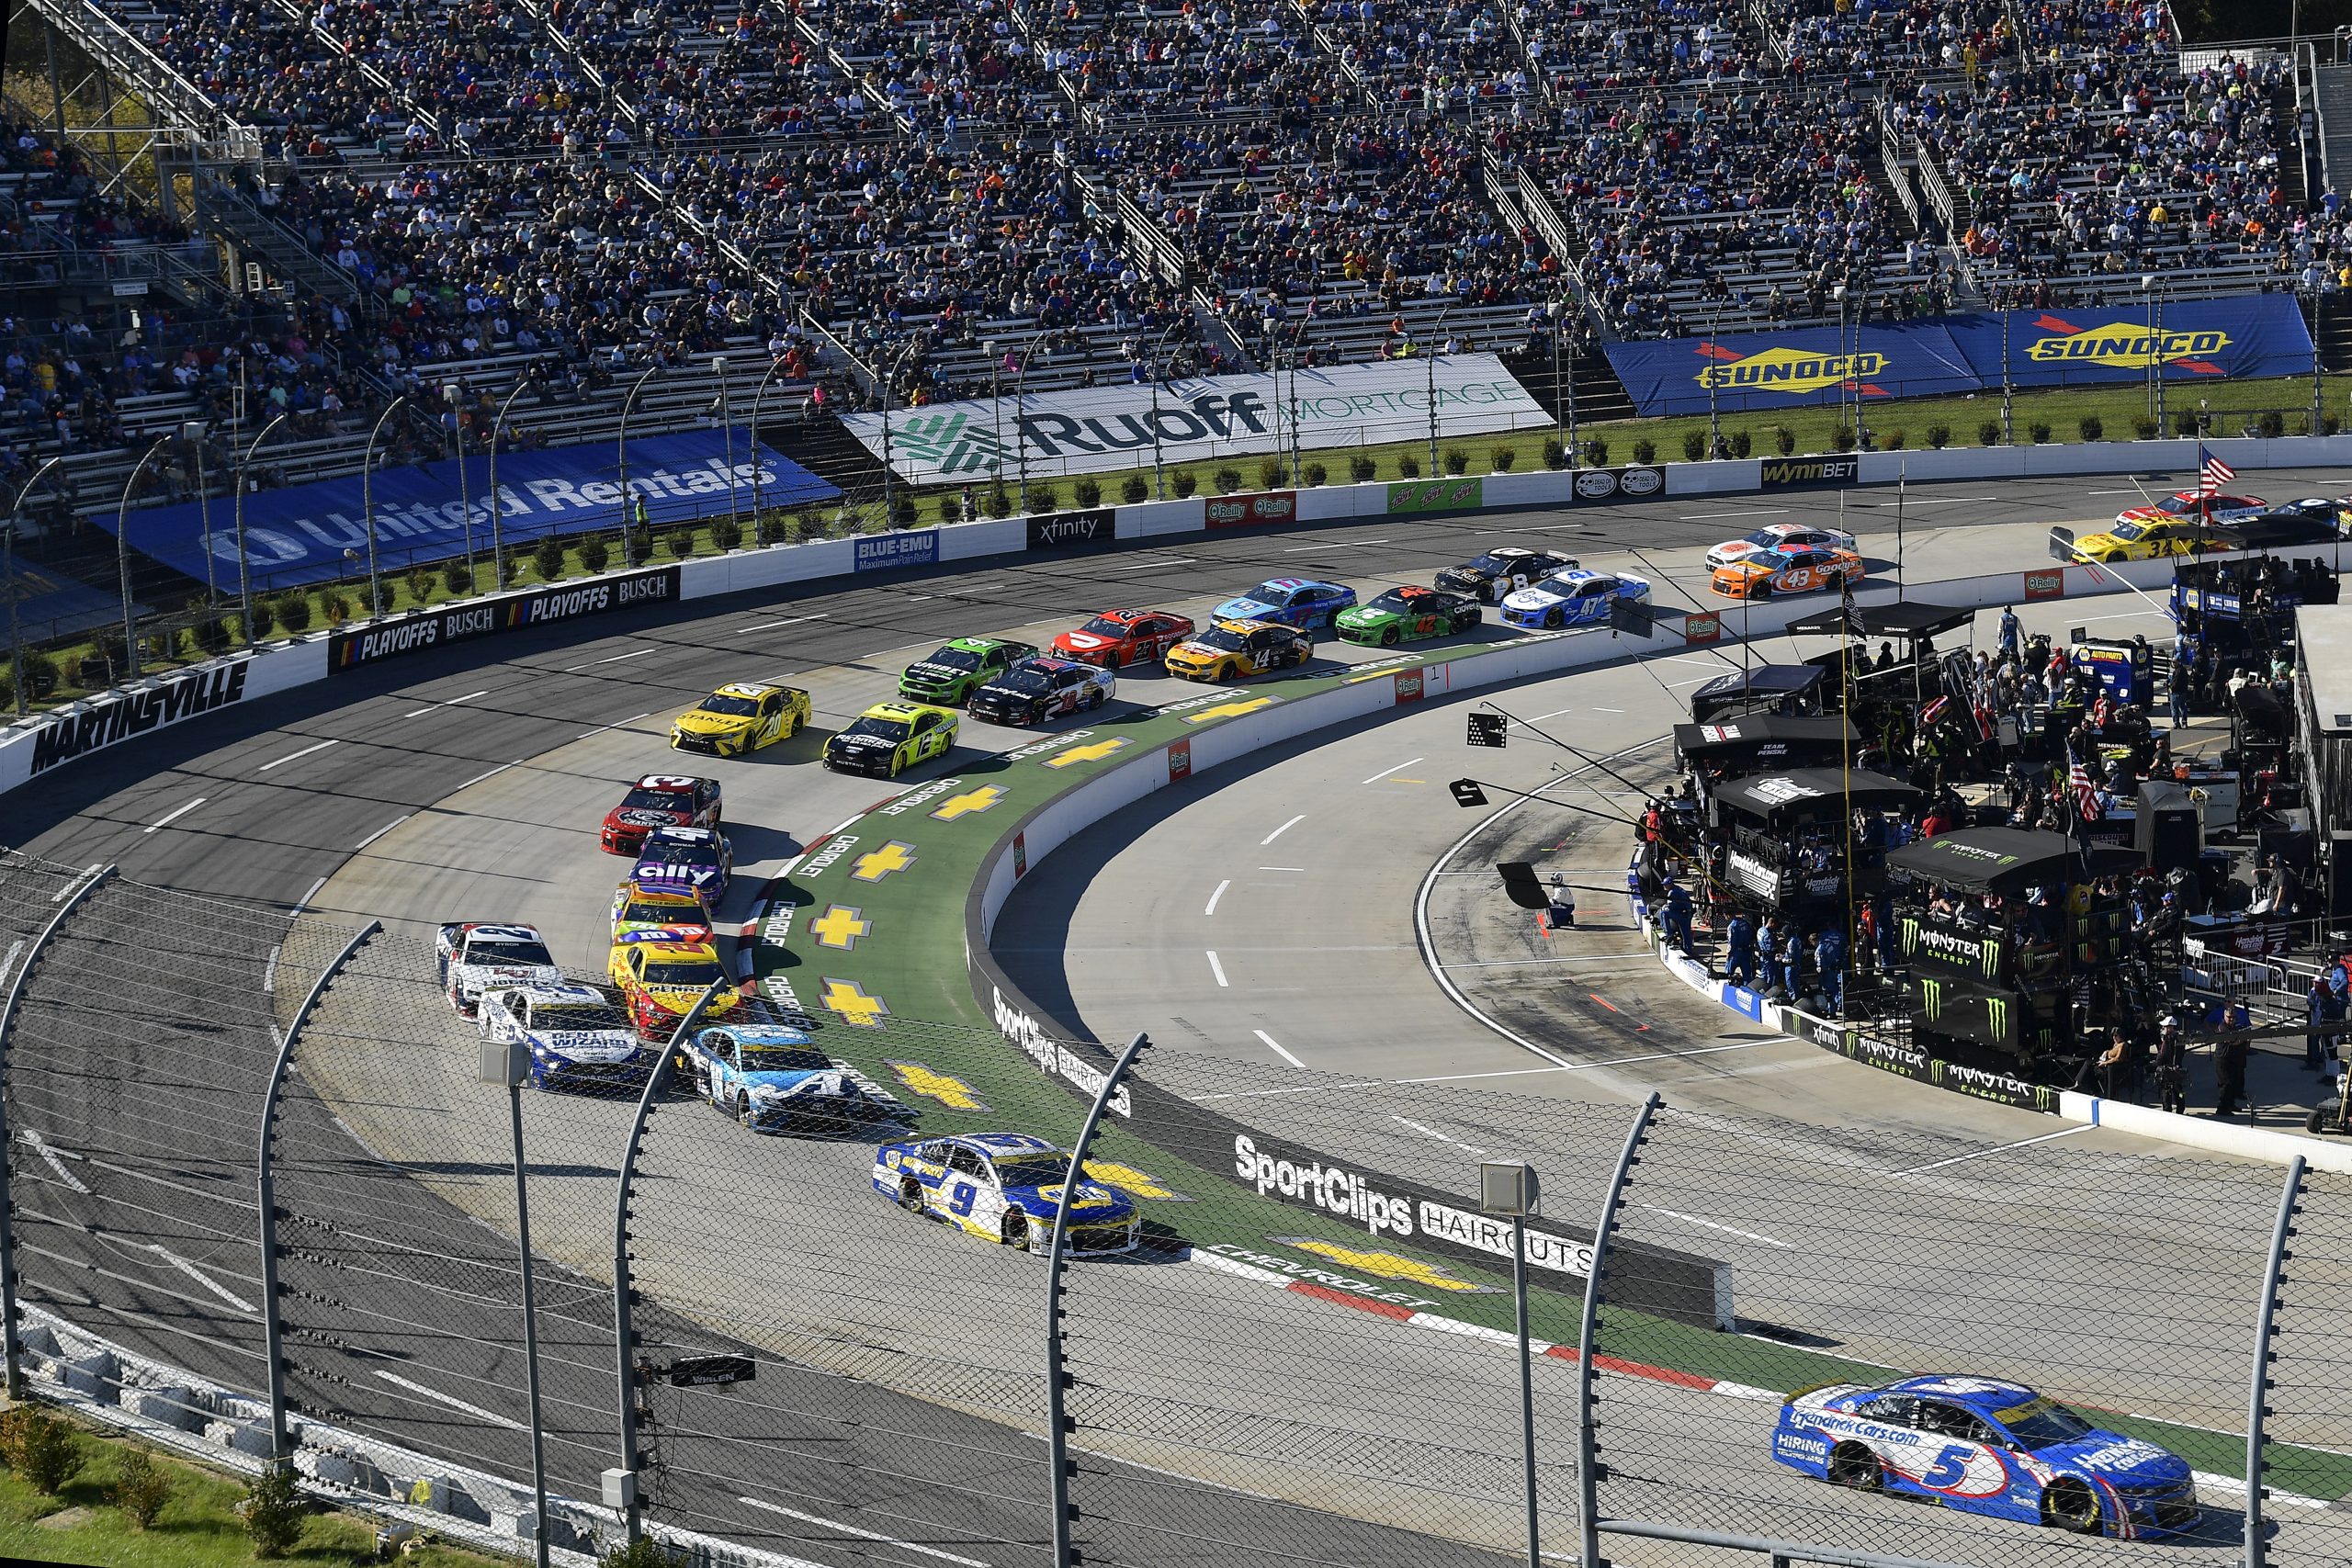 MARTINSVILLE, VIRGINIA - OCTOBER 31: Kyle Larson, driver of the #5 HendrickCars.com Chevrolet, leads the field during the NASCAR Cup Series Xfinity 500 at Martinsville Speedway on October 31, 2021 in Martinsville, Virginia. (Photo by Logan Riely/Getty Images)